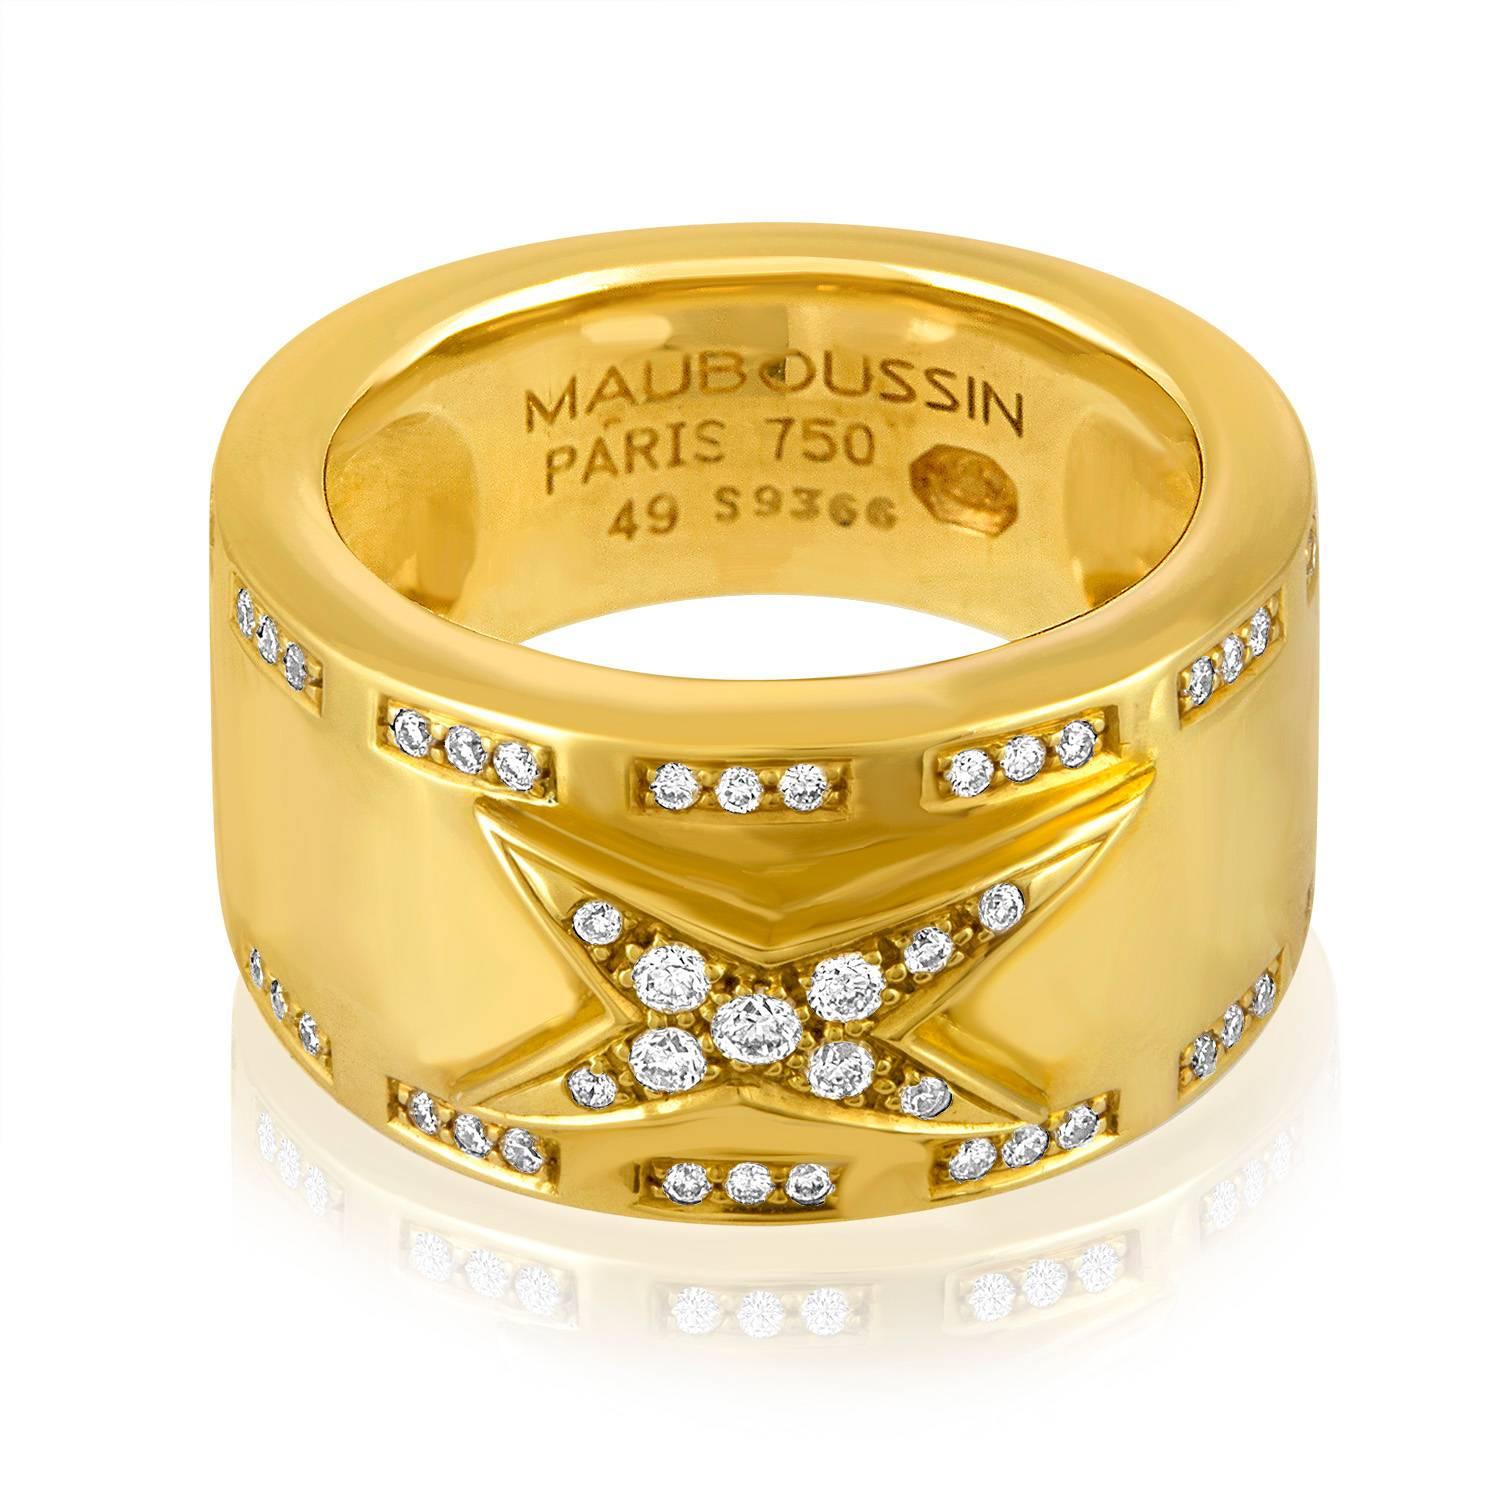 Mauboussin Etoile Divine Gold Band Ring
The ring is 18K Yellow Gold
There are 0.35 Carats in Diamonds F/G VS/SI
The ring is a size 5
The ring weighs 10.9 grams